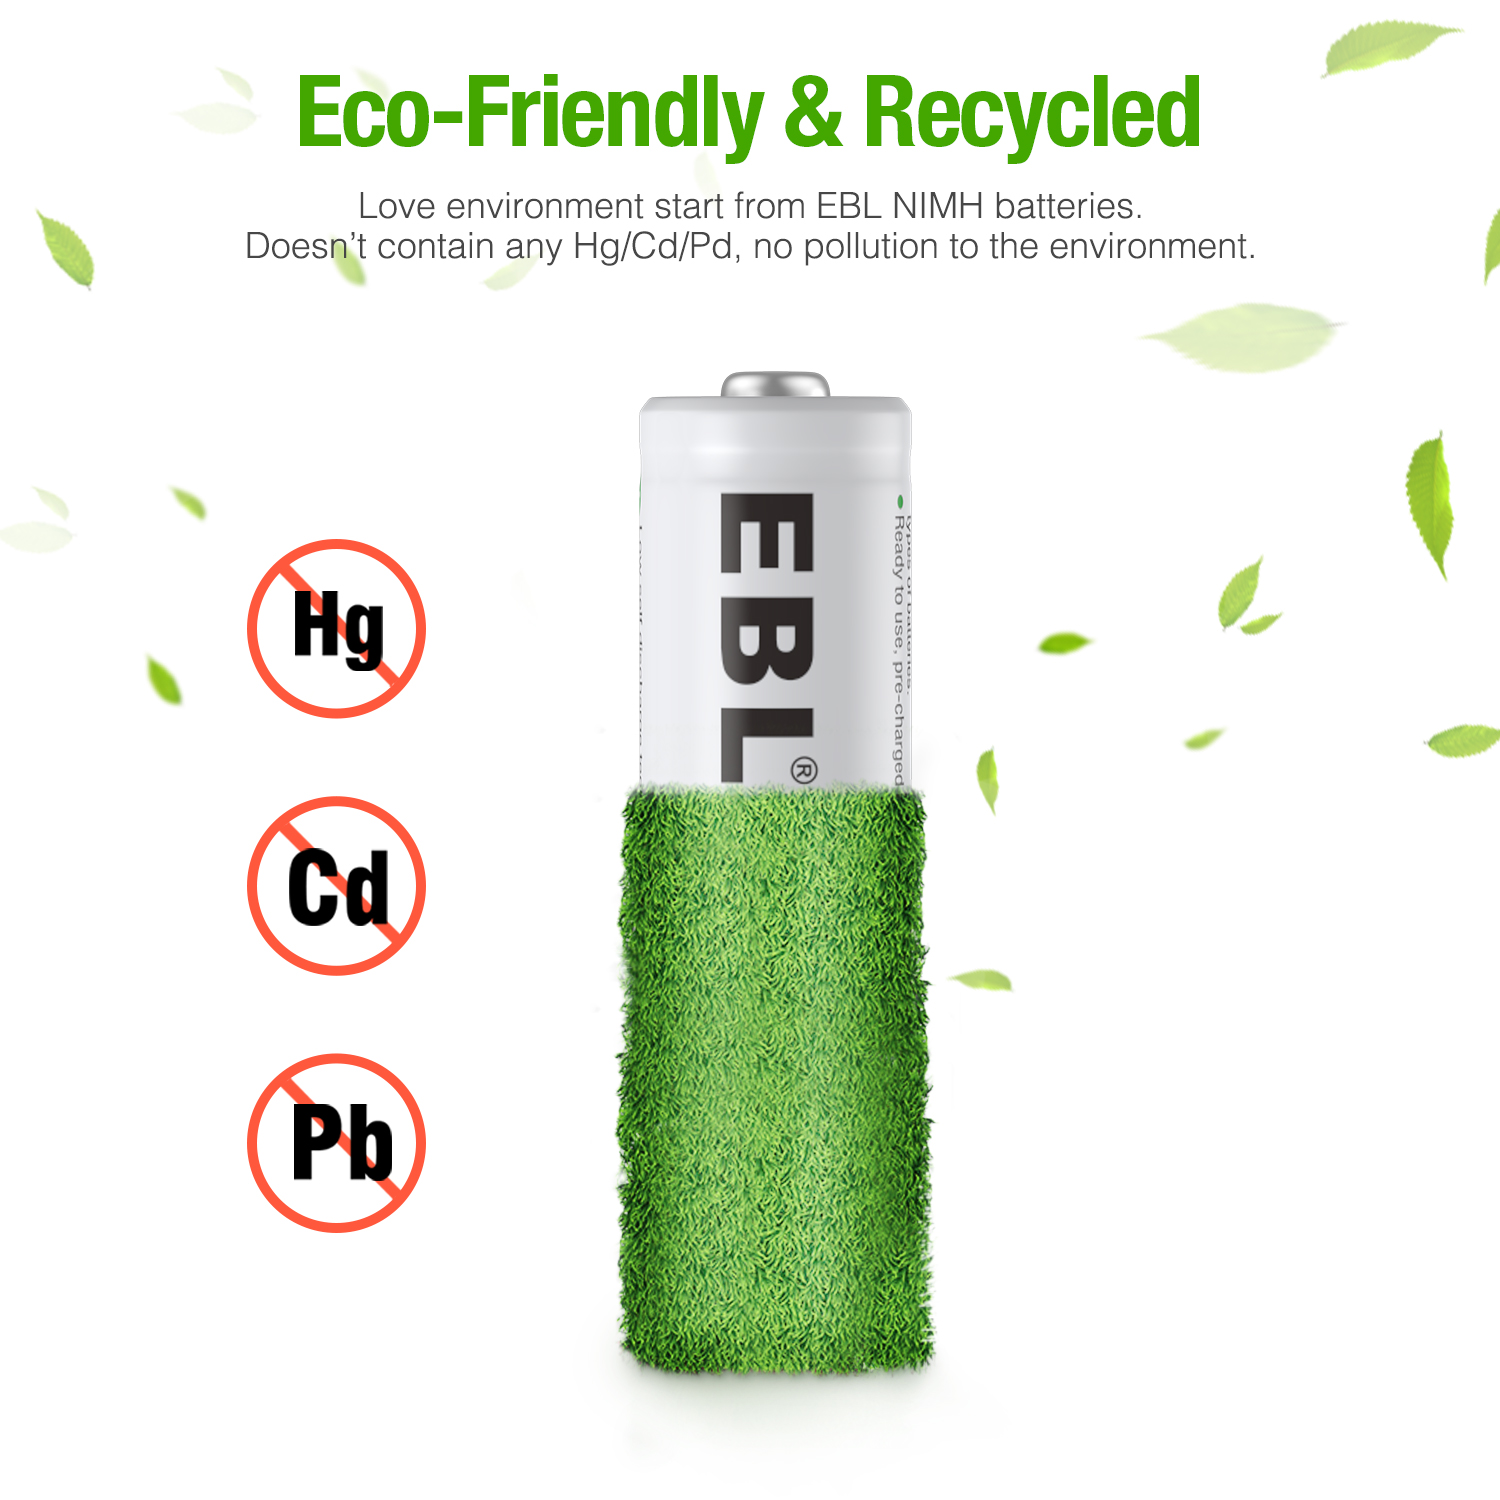 Eco-Friendly & Recycled